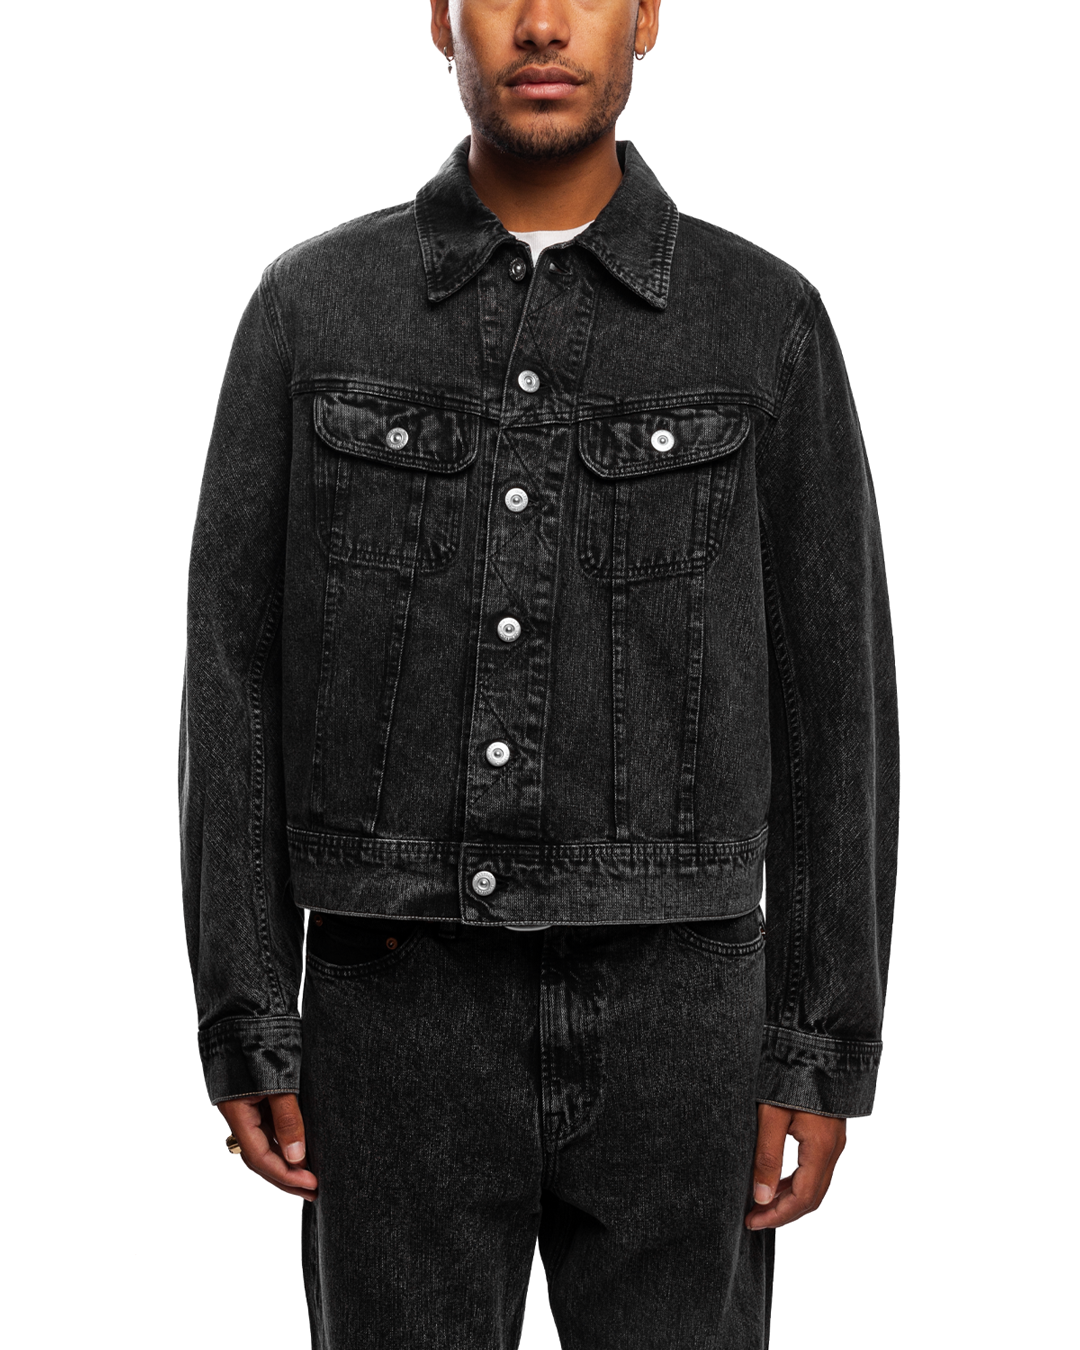 Rodeo Jacket Overdyed Black Chain Twill